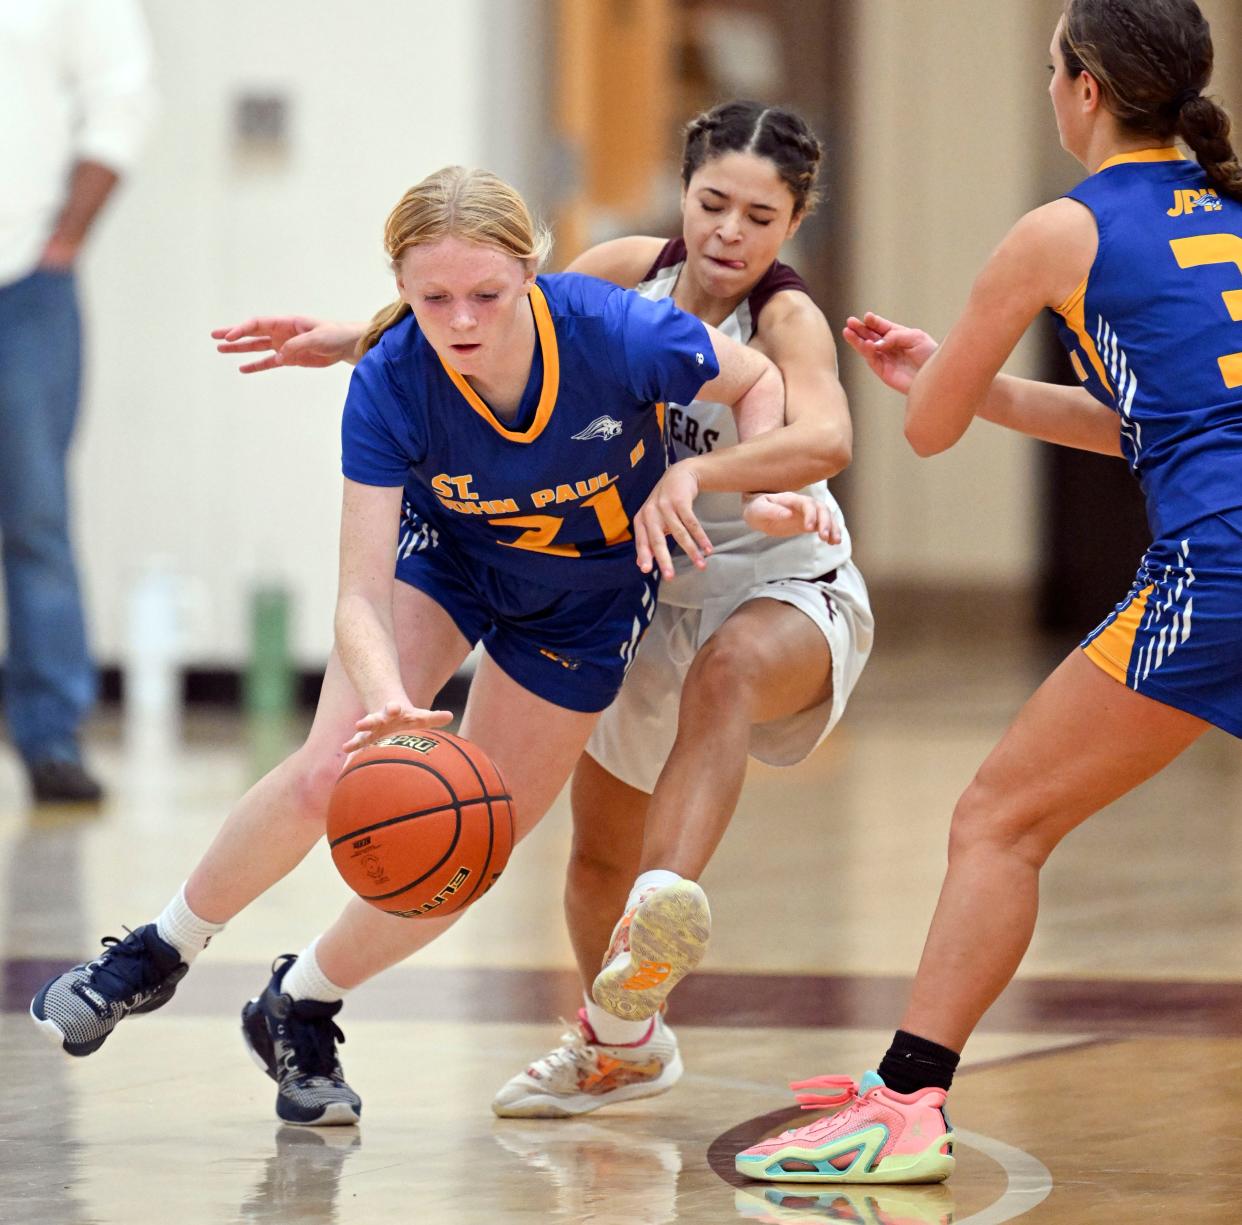 FALMOUTH 01/04/24  Raegan Dillon of St. John Paul II attempts to drive Jaylynn Fernandez of Falmouth into a pick by her teammate Marlo Jumper. girls basketball
Ron Schloerb / Cape Cod Times